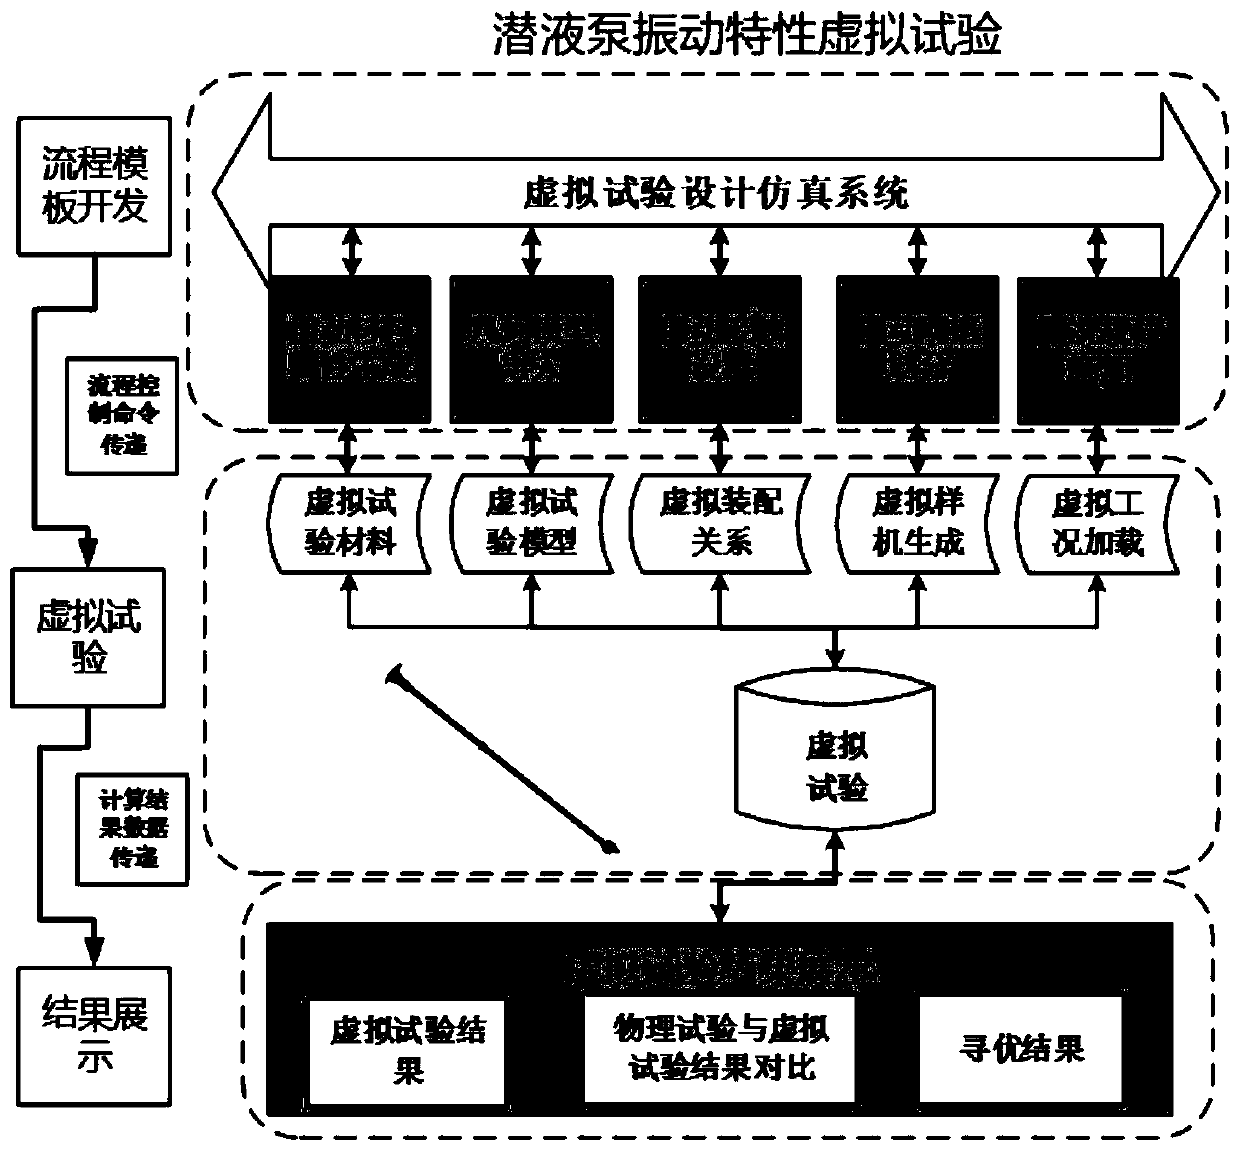 Marine electromechanical equipment virtual test application service system and method